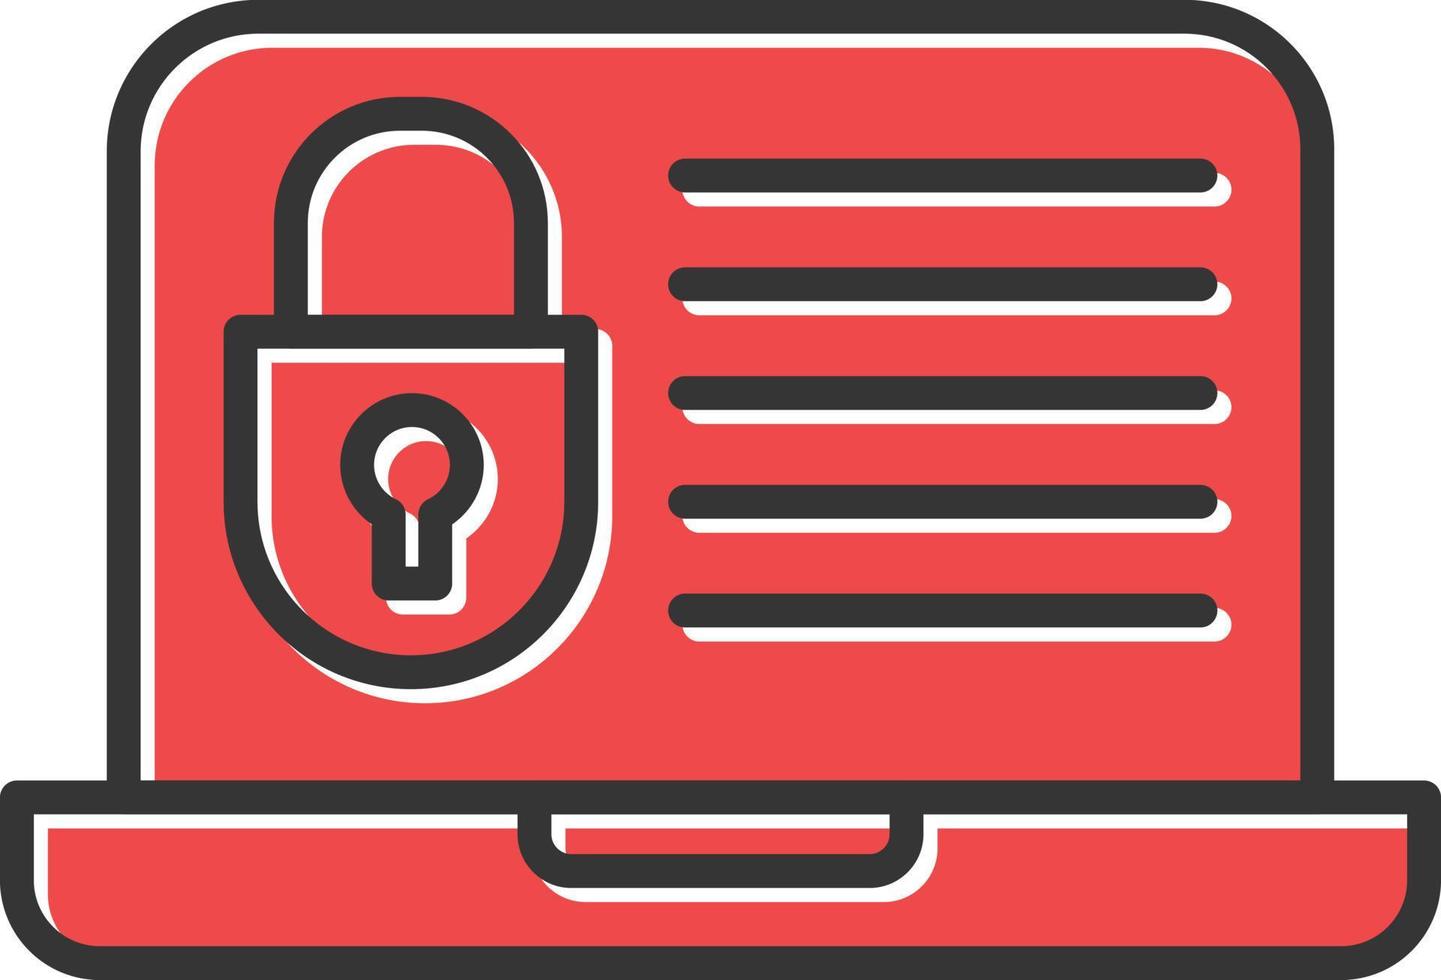 Laptop Security Filled Icon vector